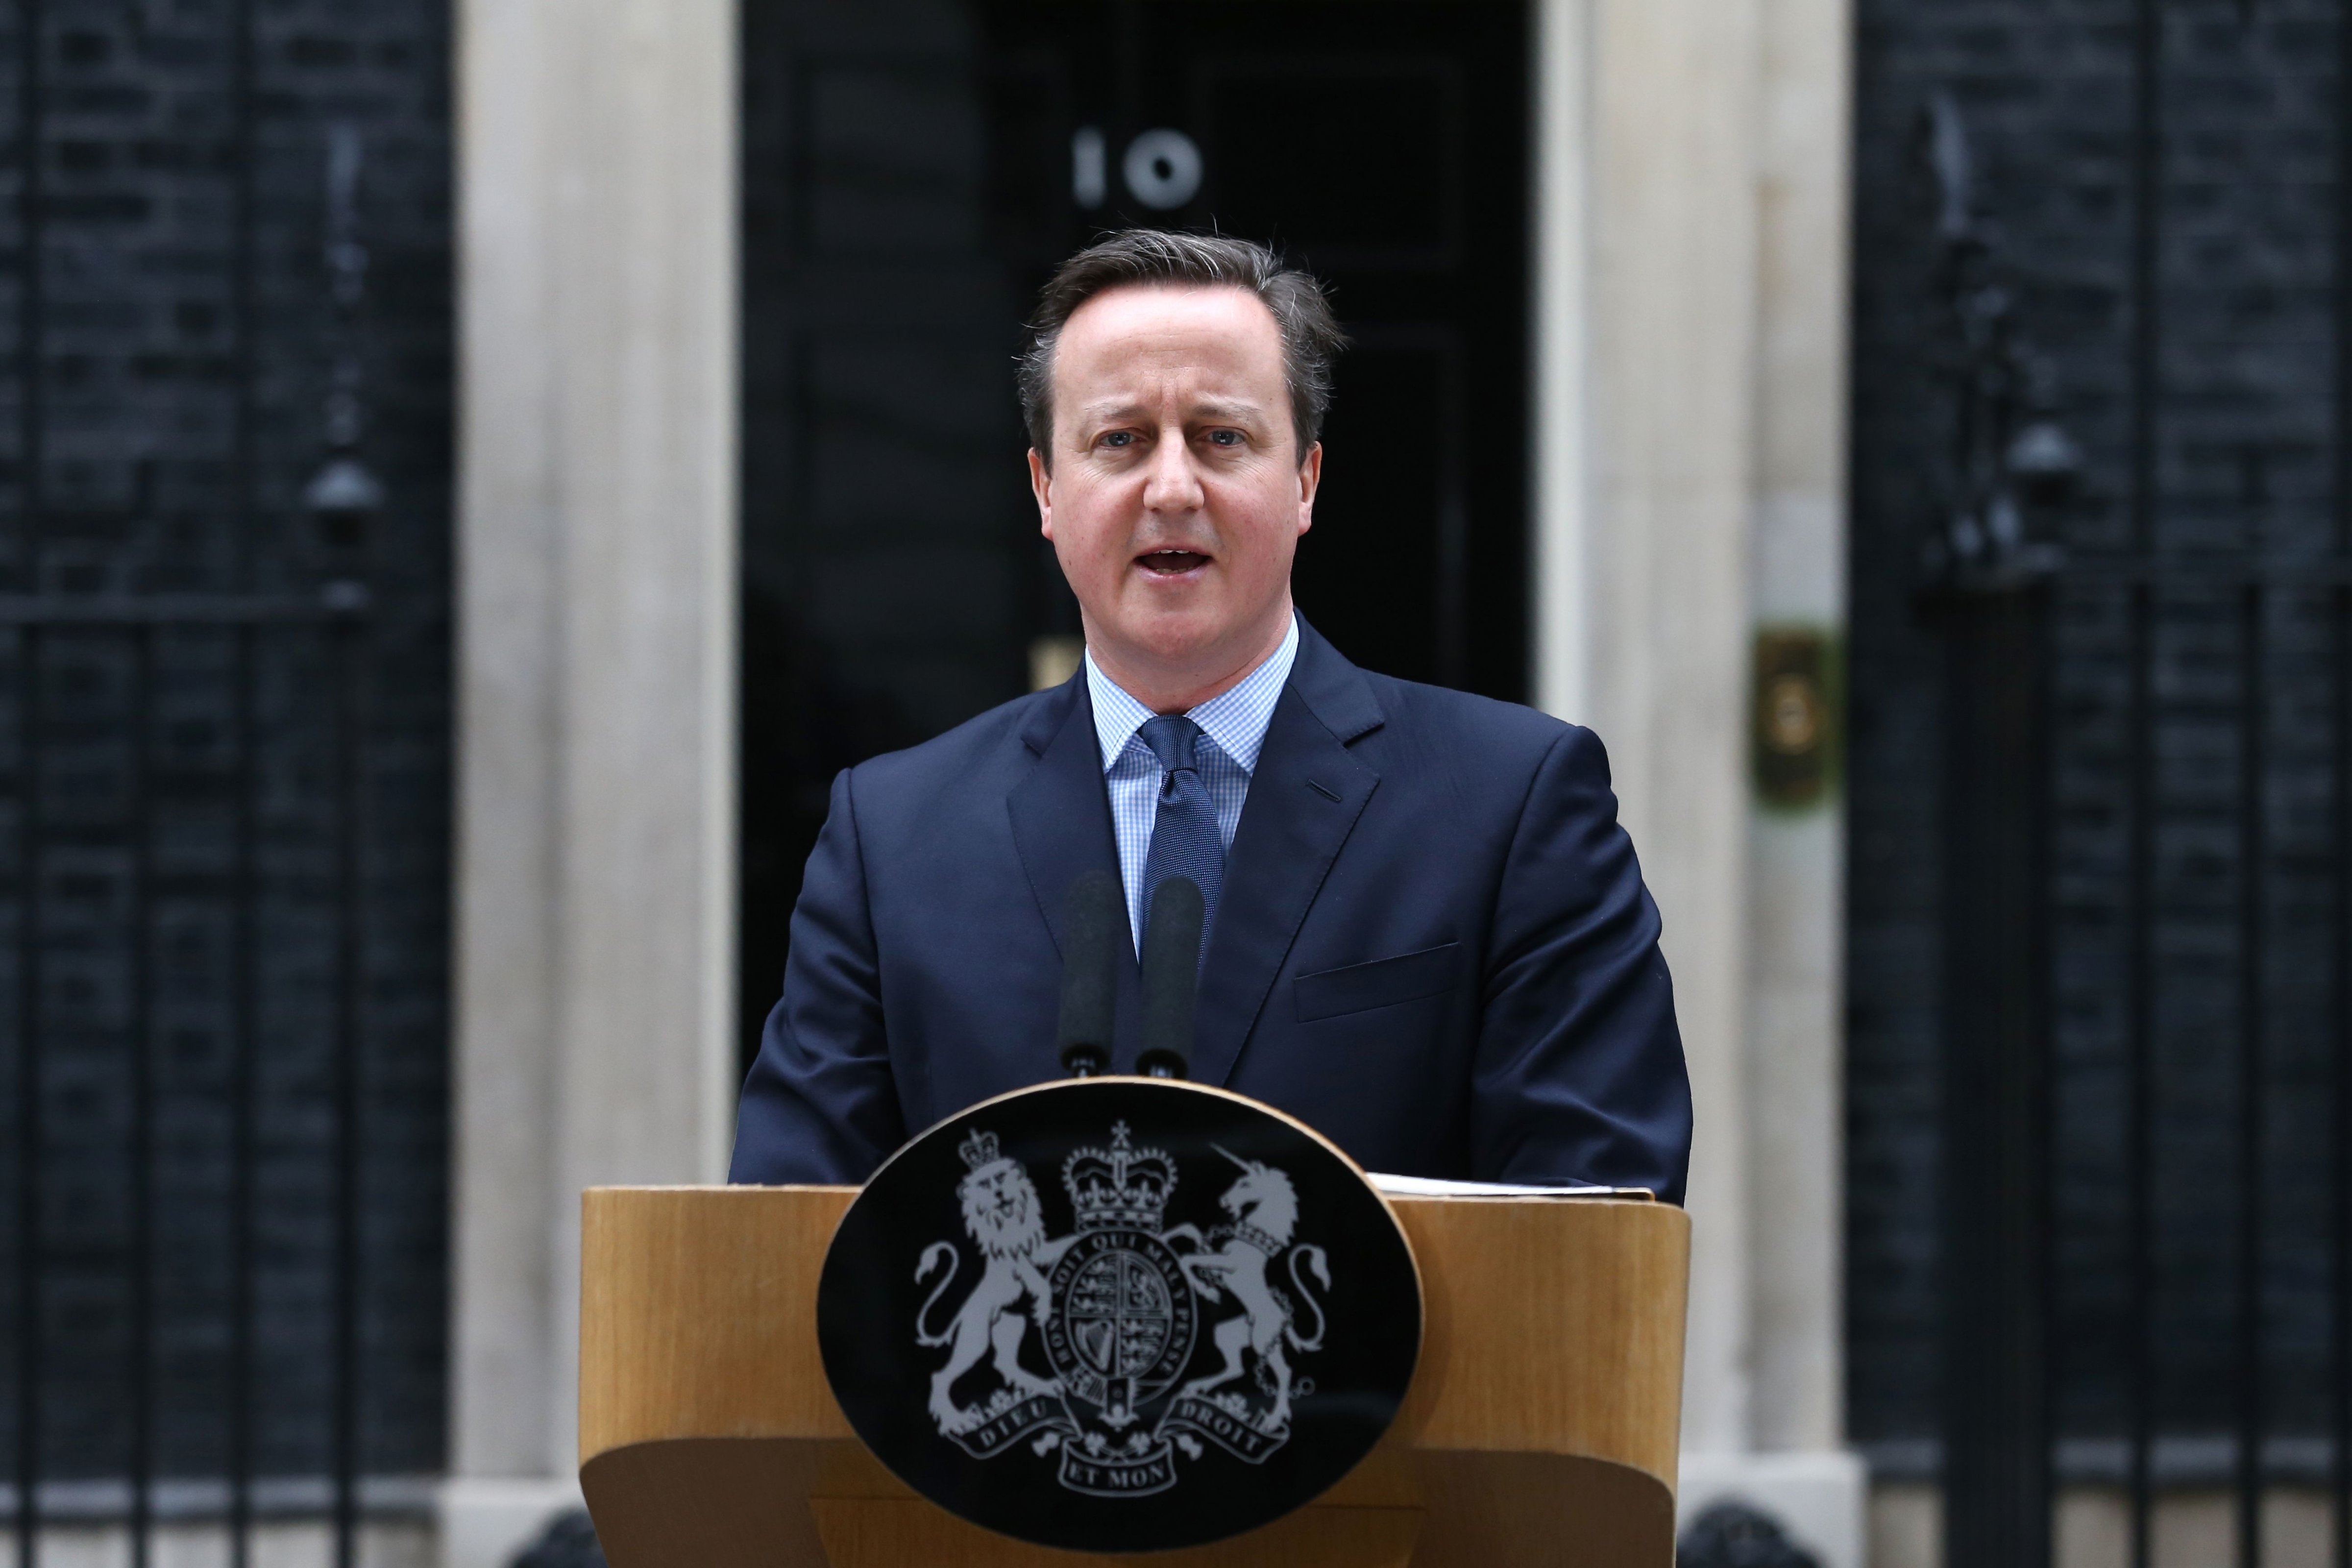 David Cameron makes a statement to the media outside 10 Downing Street in London on Feb. 20, 2016. (Justin Tallis—AFP/Getty Images)